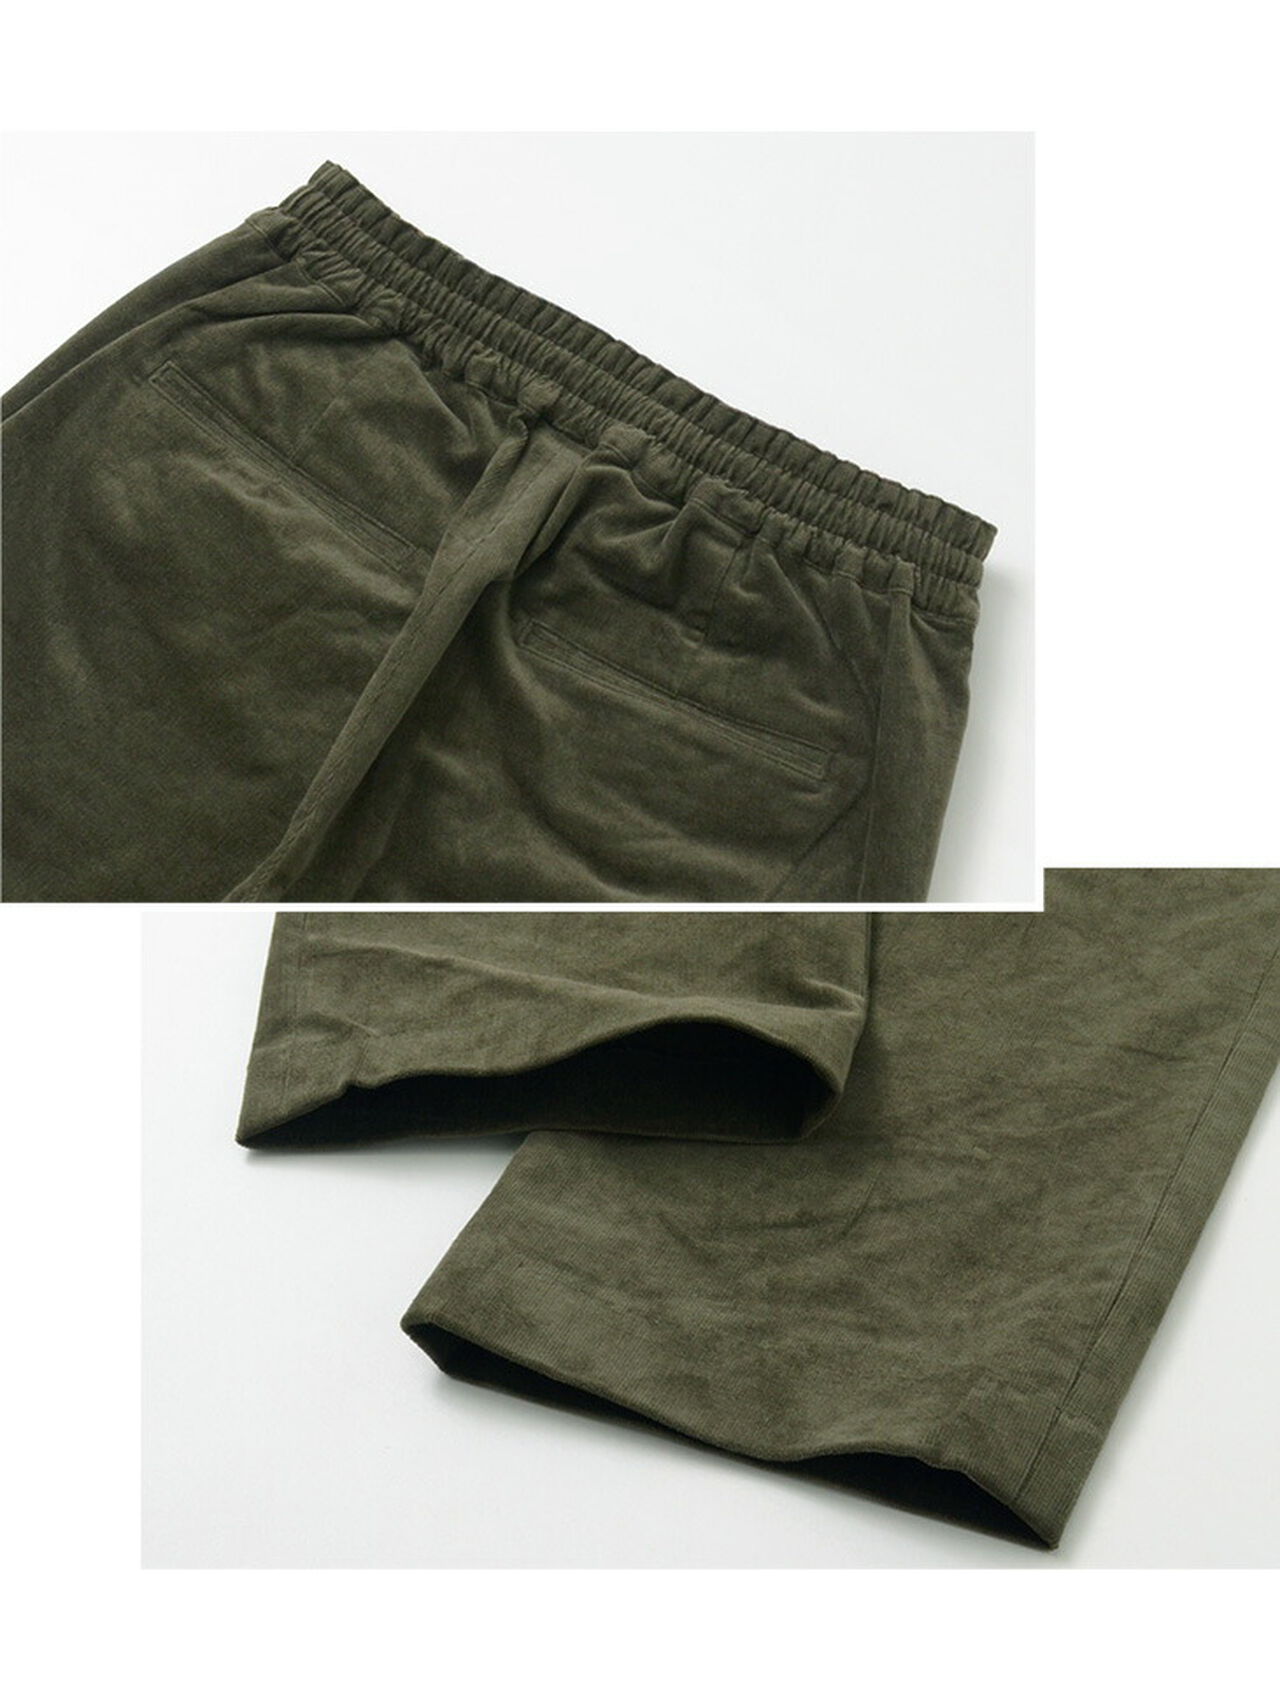 Finewell Corduroy In-Tac Pants,, large image number 8